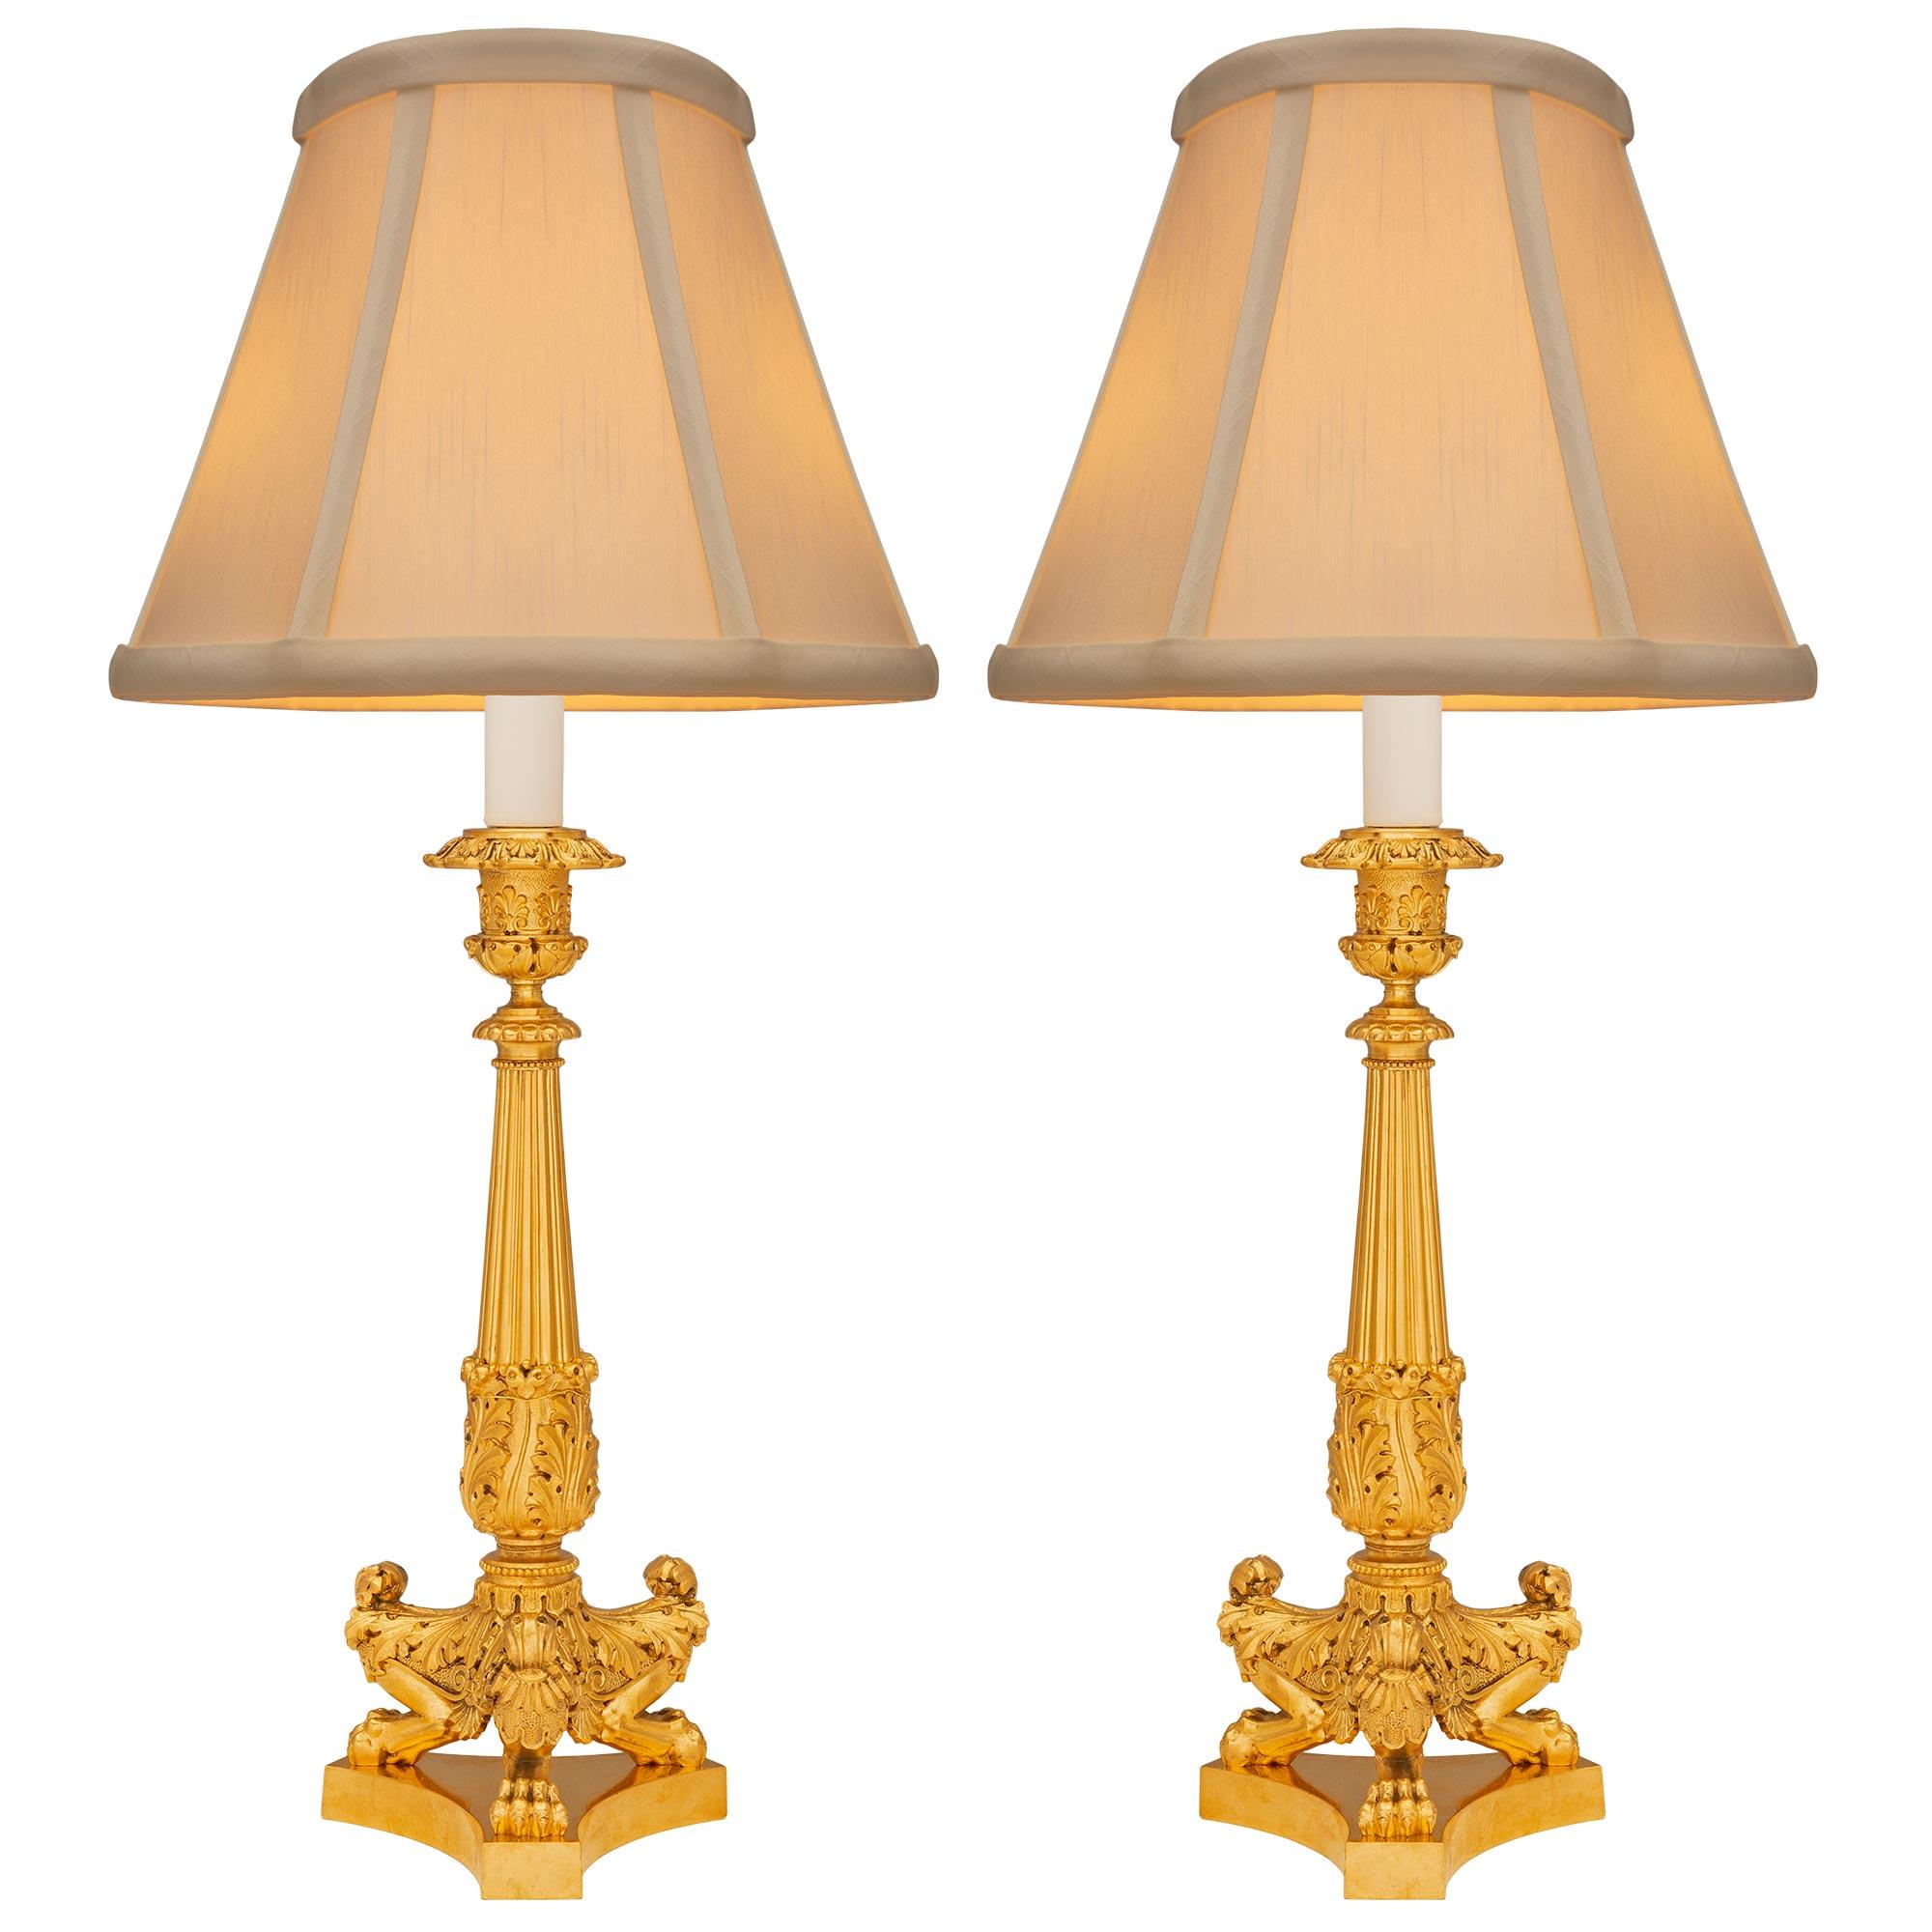 A striking pair of French 19th century Charles X st. ormolu candlestick lamps. Each lamp is raised by an elegant triangular base with concave sides below an impressive scrolled foliate support with finely detailed acanthus leaves, palmettes, and